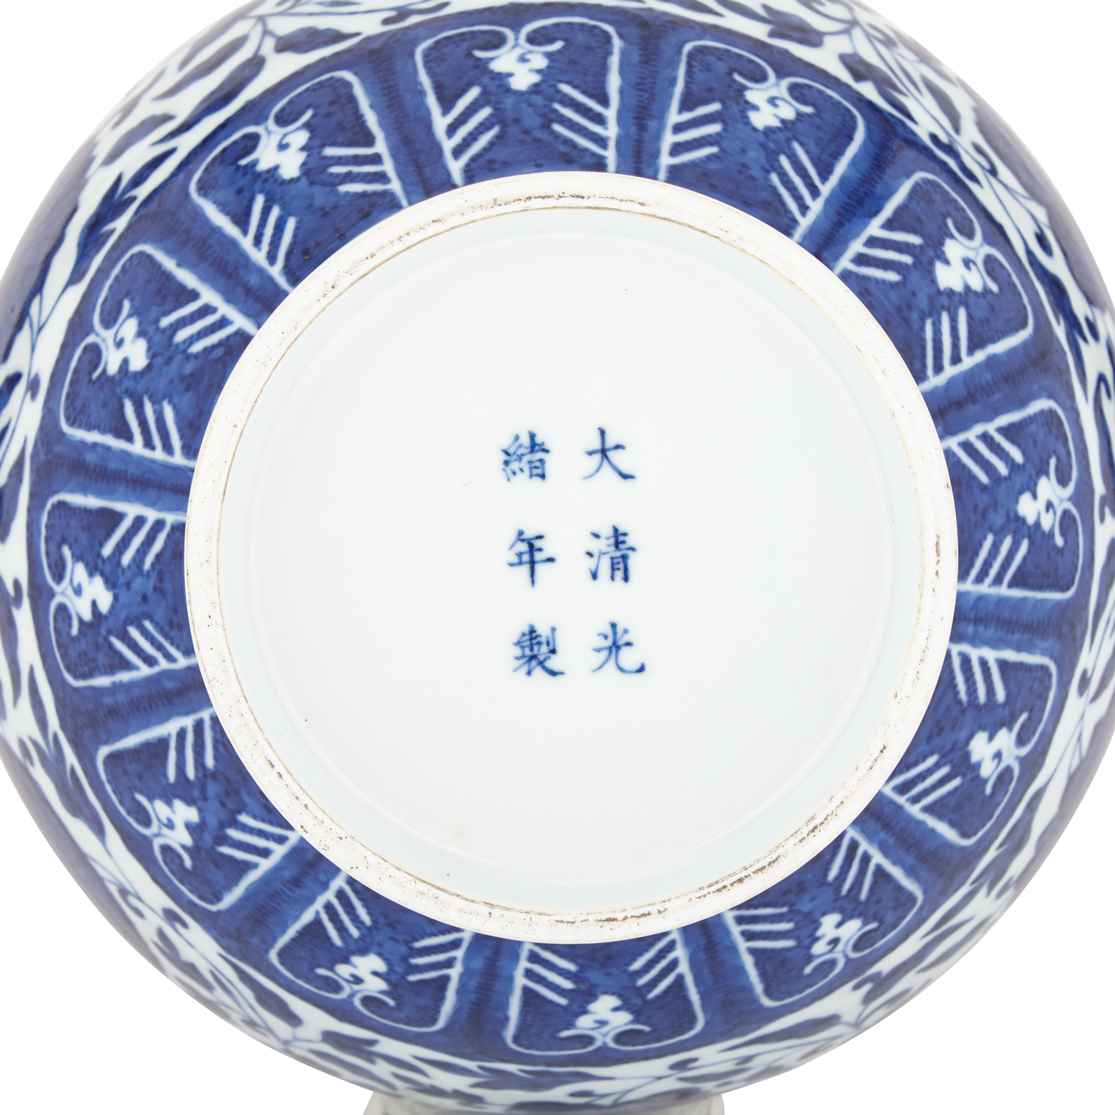 Fine Blue and White Bottle Vase, Guangxu Six-Character Mark in Underglaze Blue and of the Period (1875-1908)